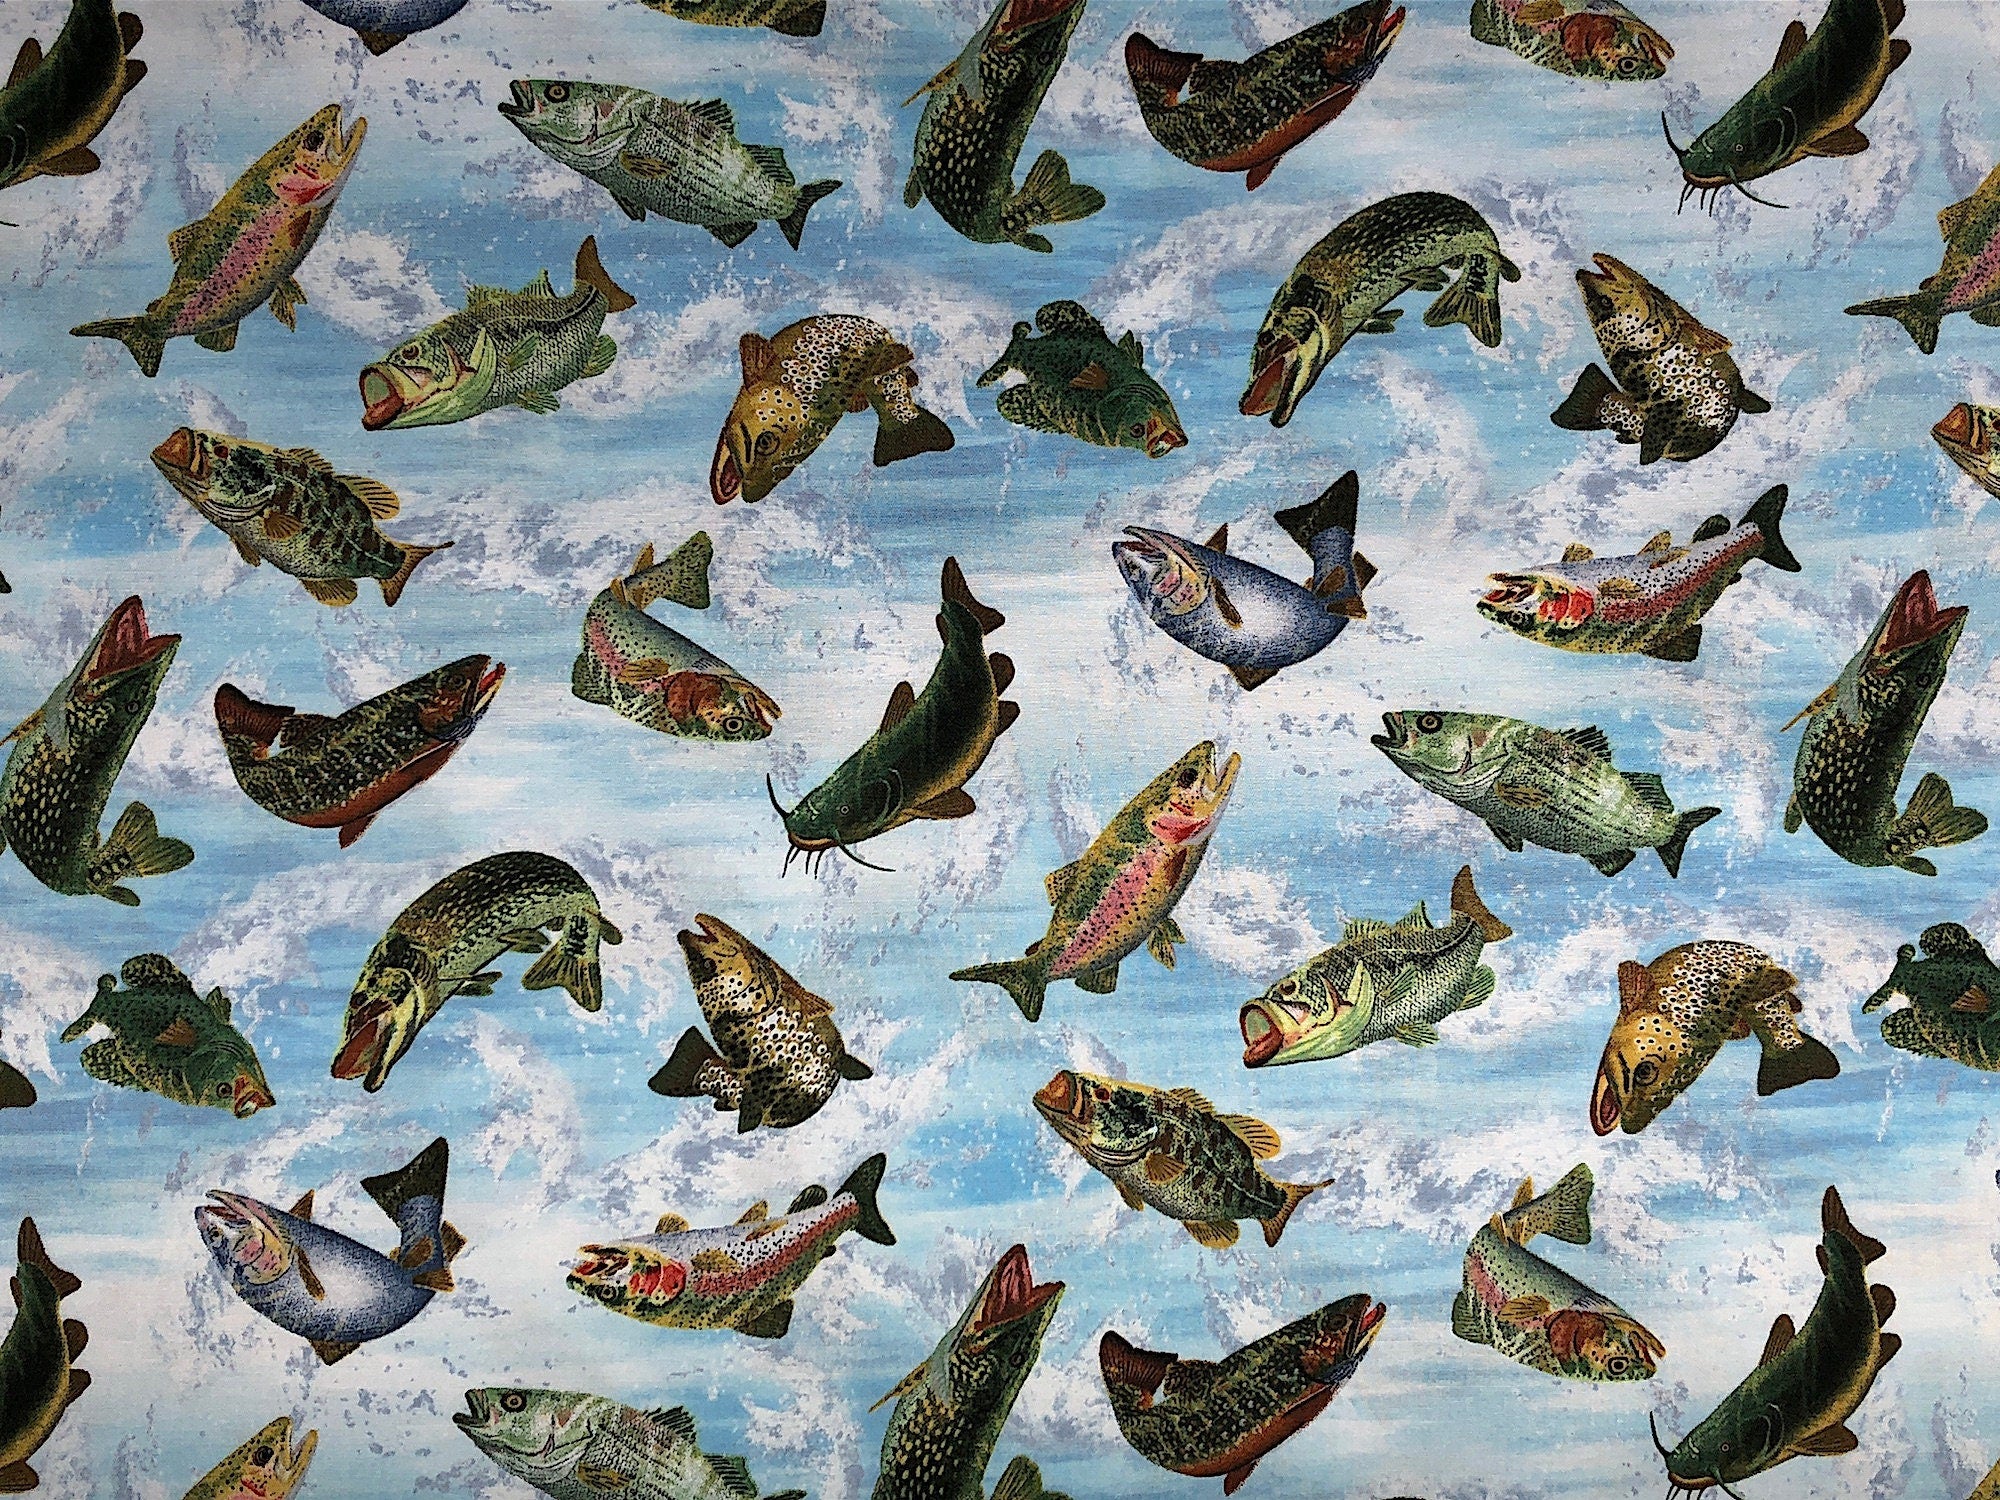 This blue fabric is covered with fish. The fish look like they are jumping in and out of the water.